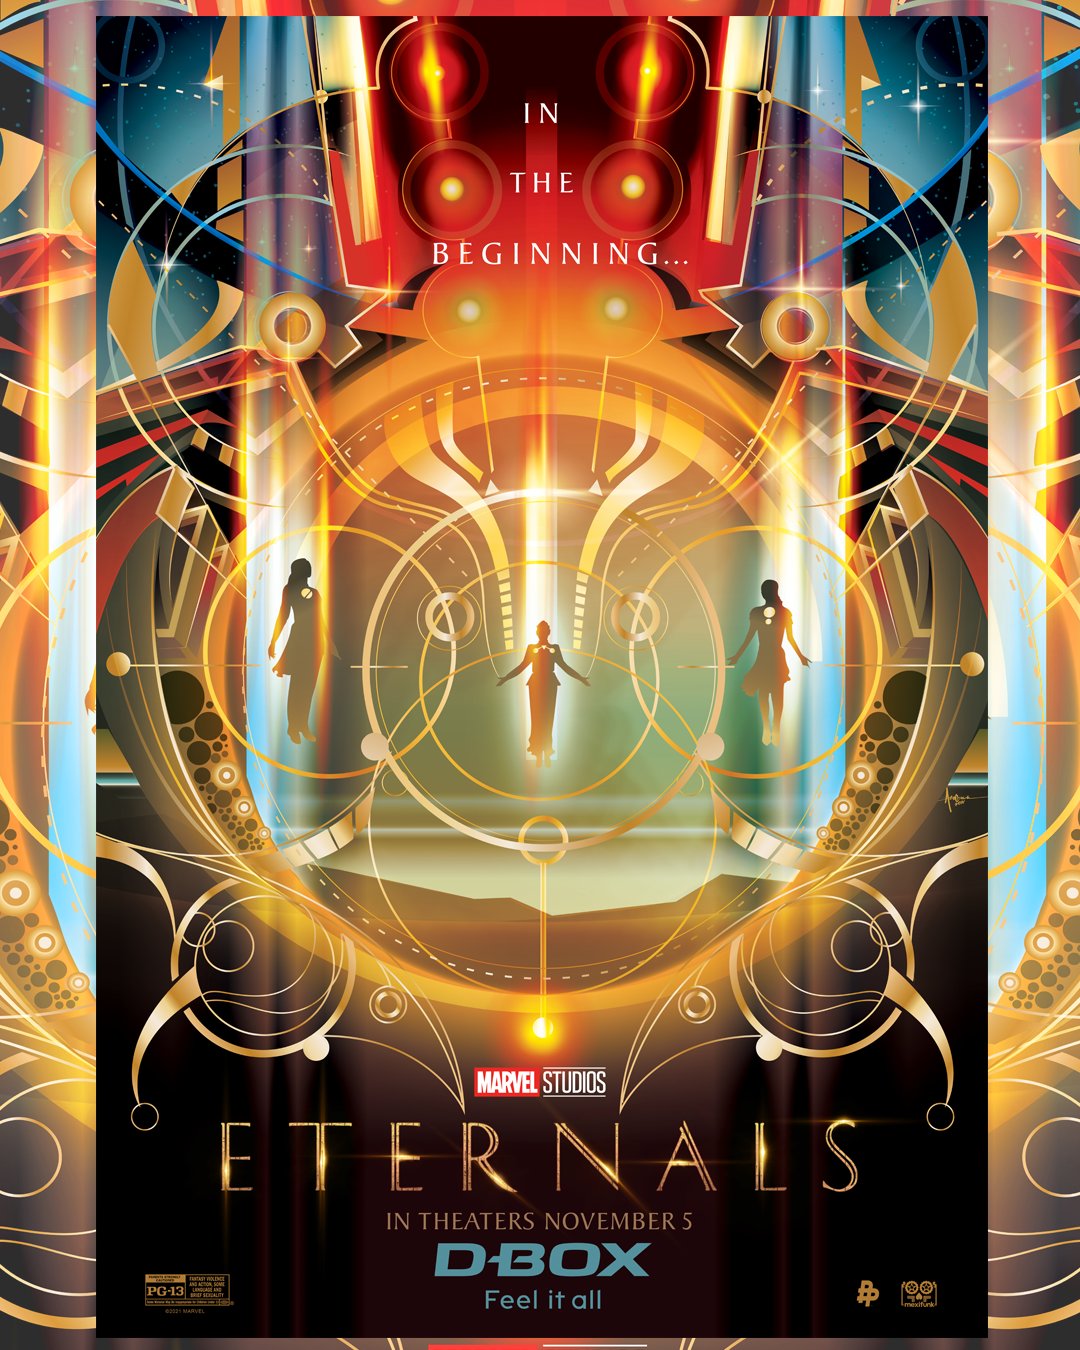 A D-BOX movie poster for the movie Eternals